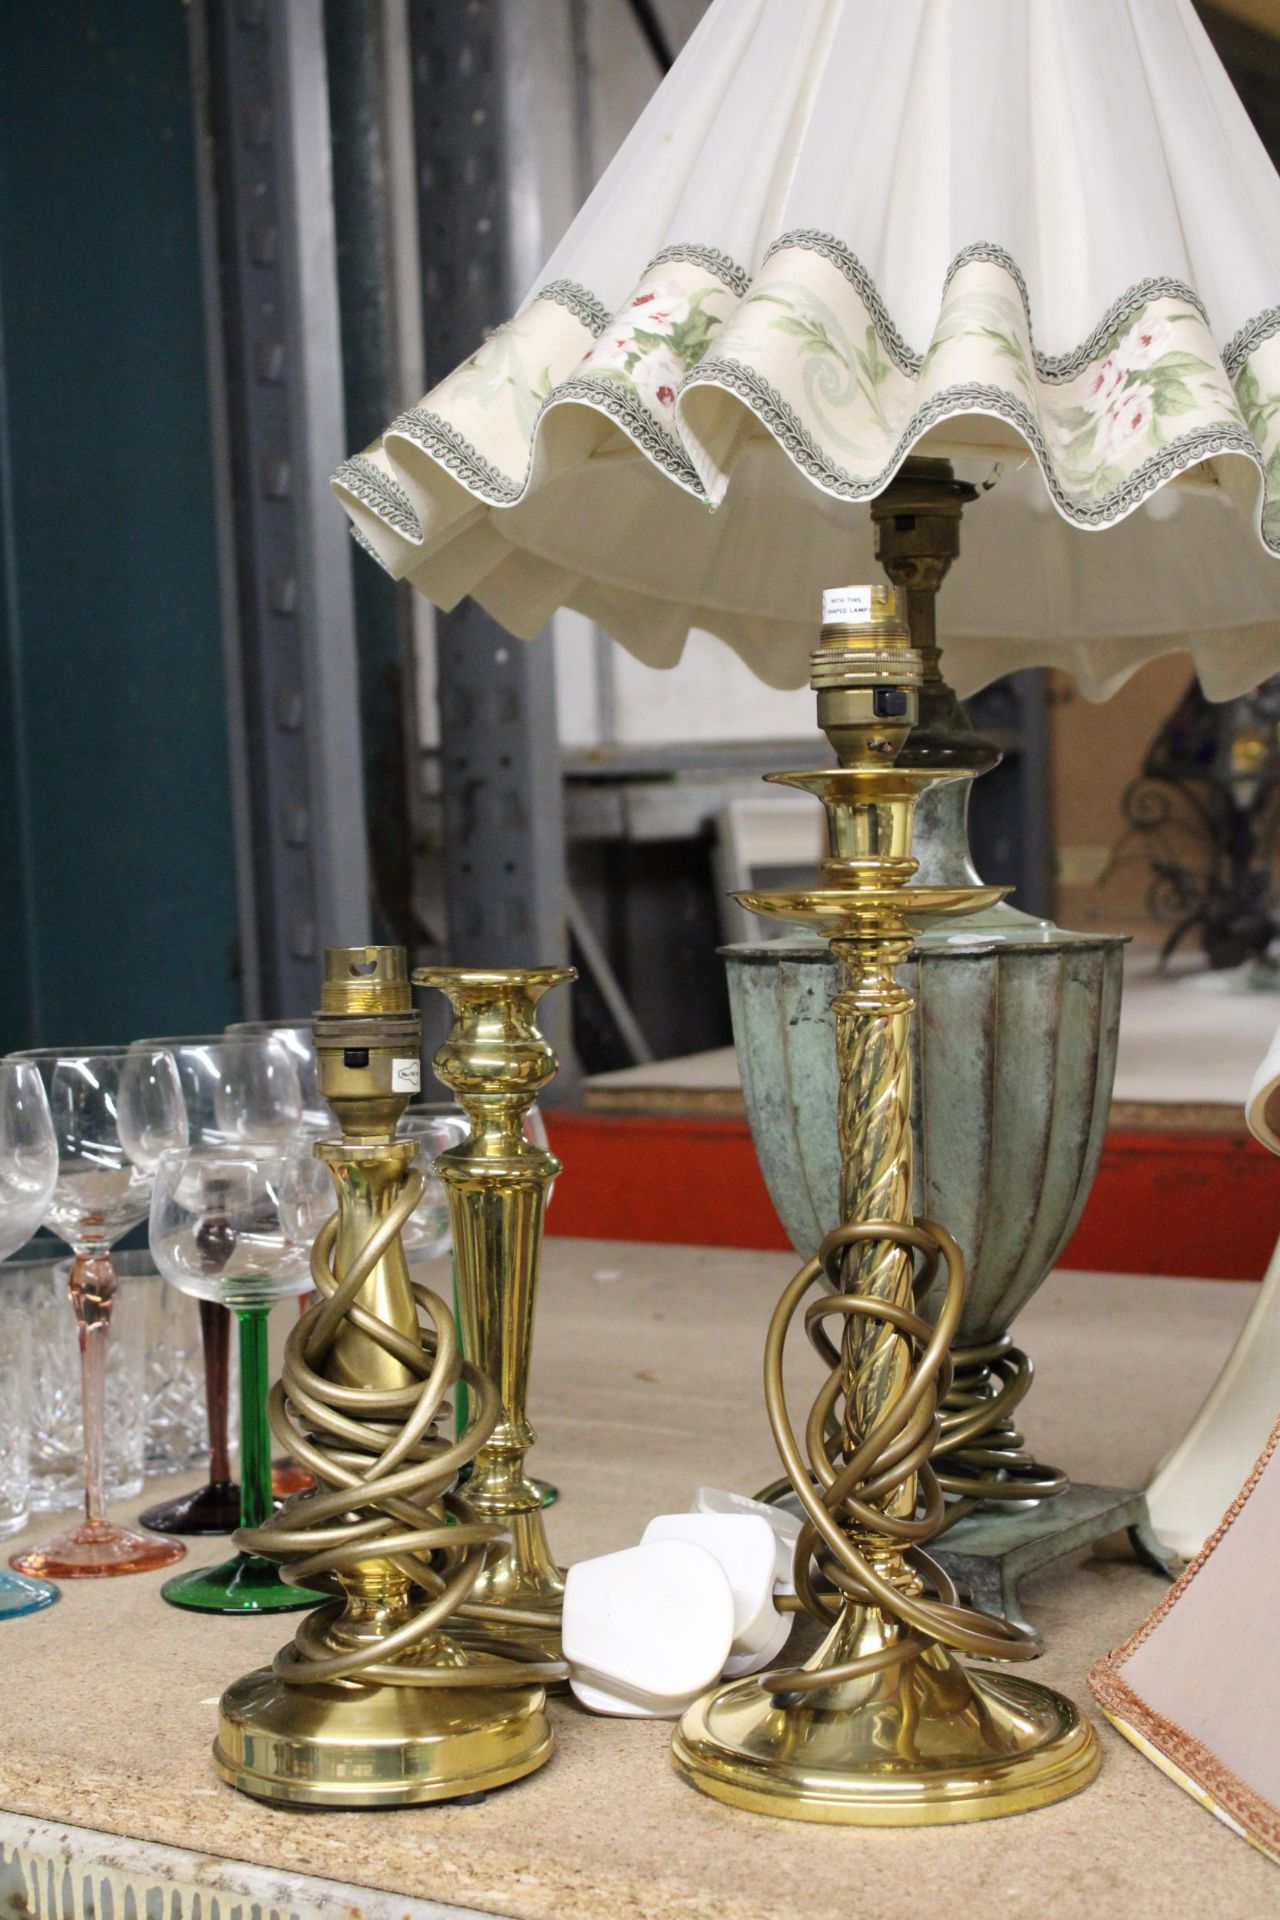 A HEAVY METAL TABLE LAMP WITH CREAM AND FLORAL SHADE, PLUS THREE BRASS TABLE LAMPS AND FOUR SHADES - Bild 2 aus 5